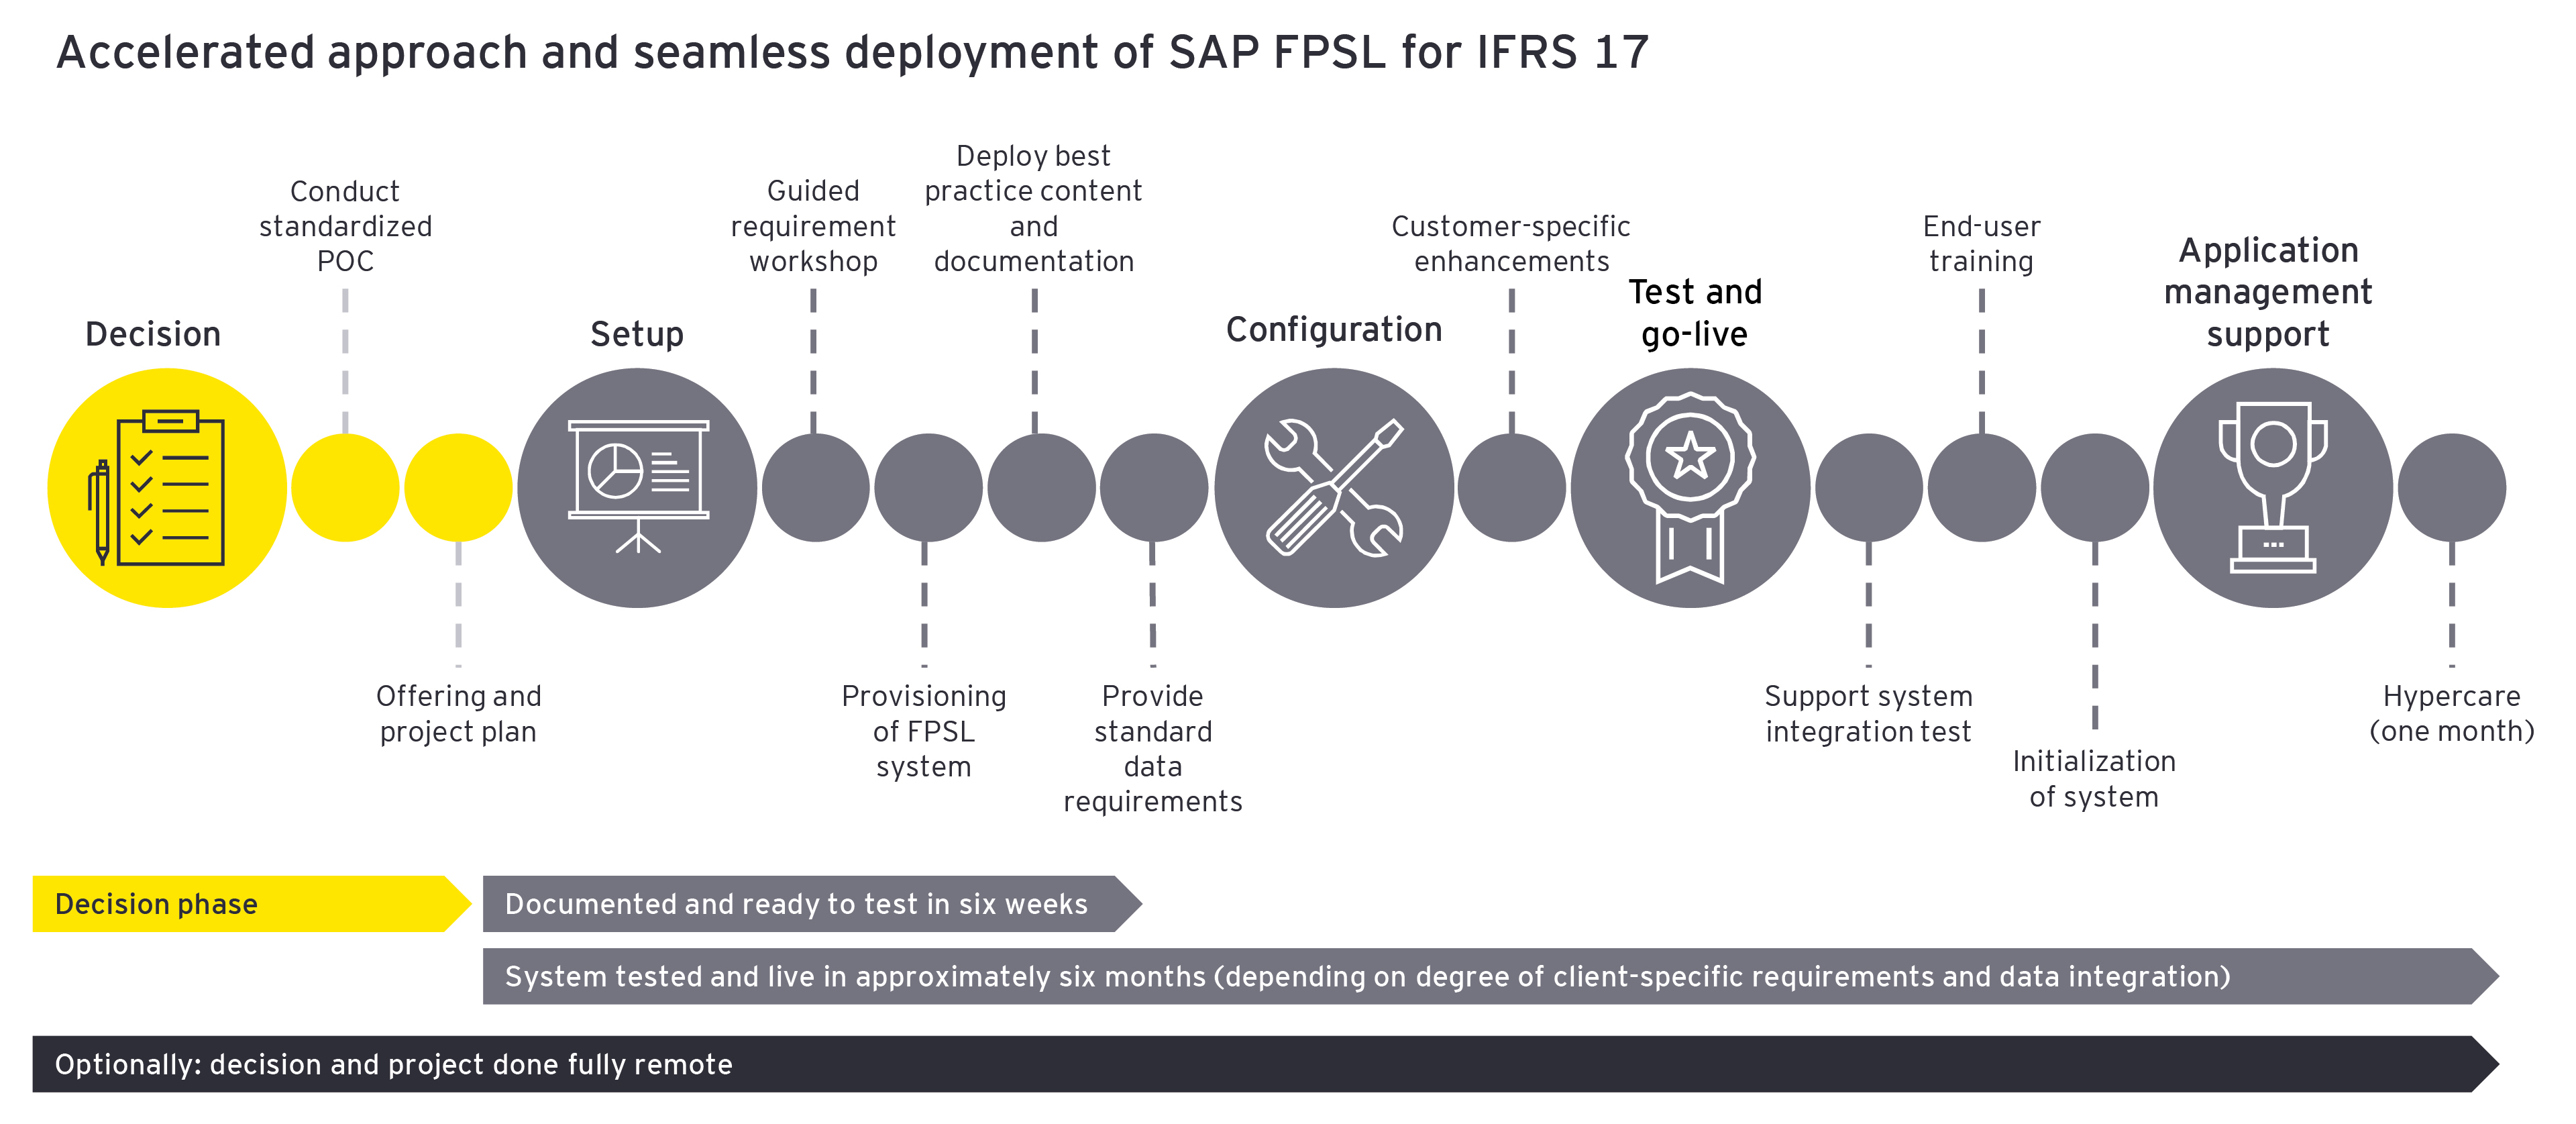 Accelerated approach and seamless deployment of sap FPSL